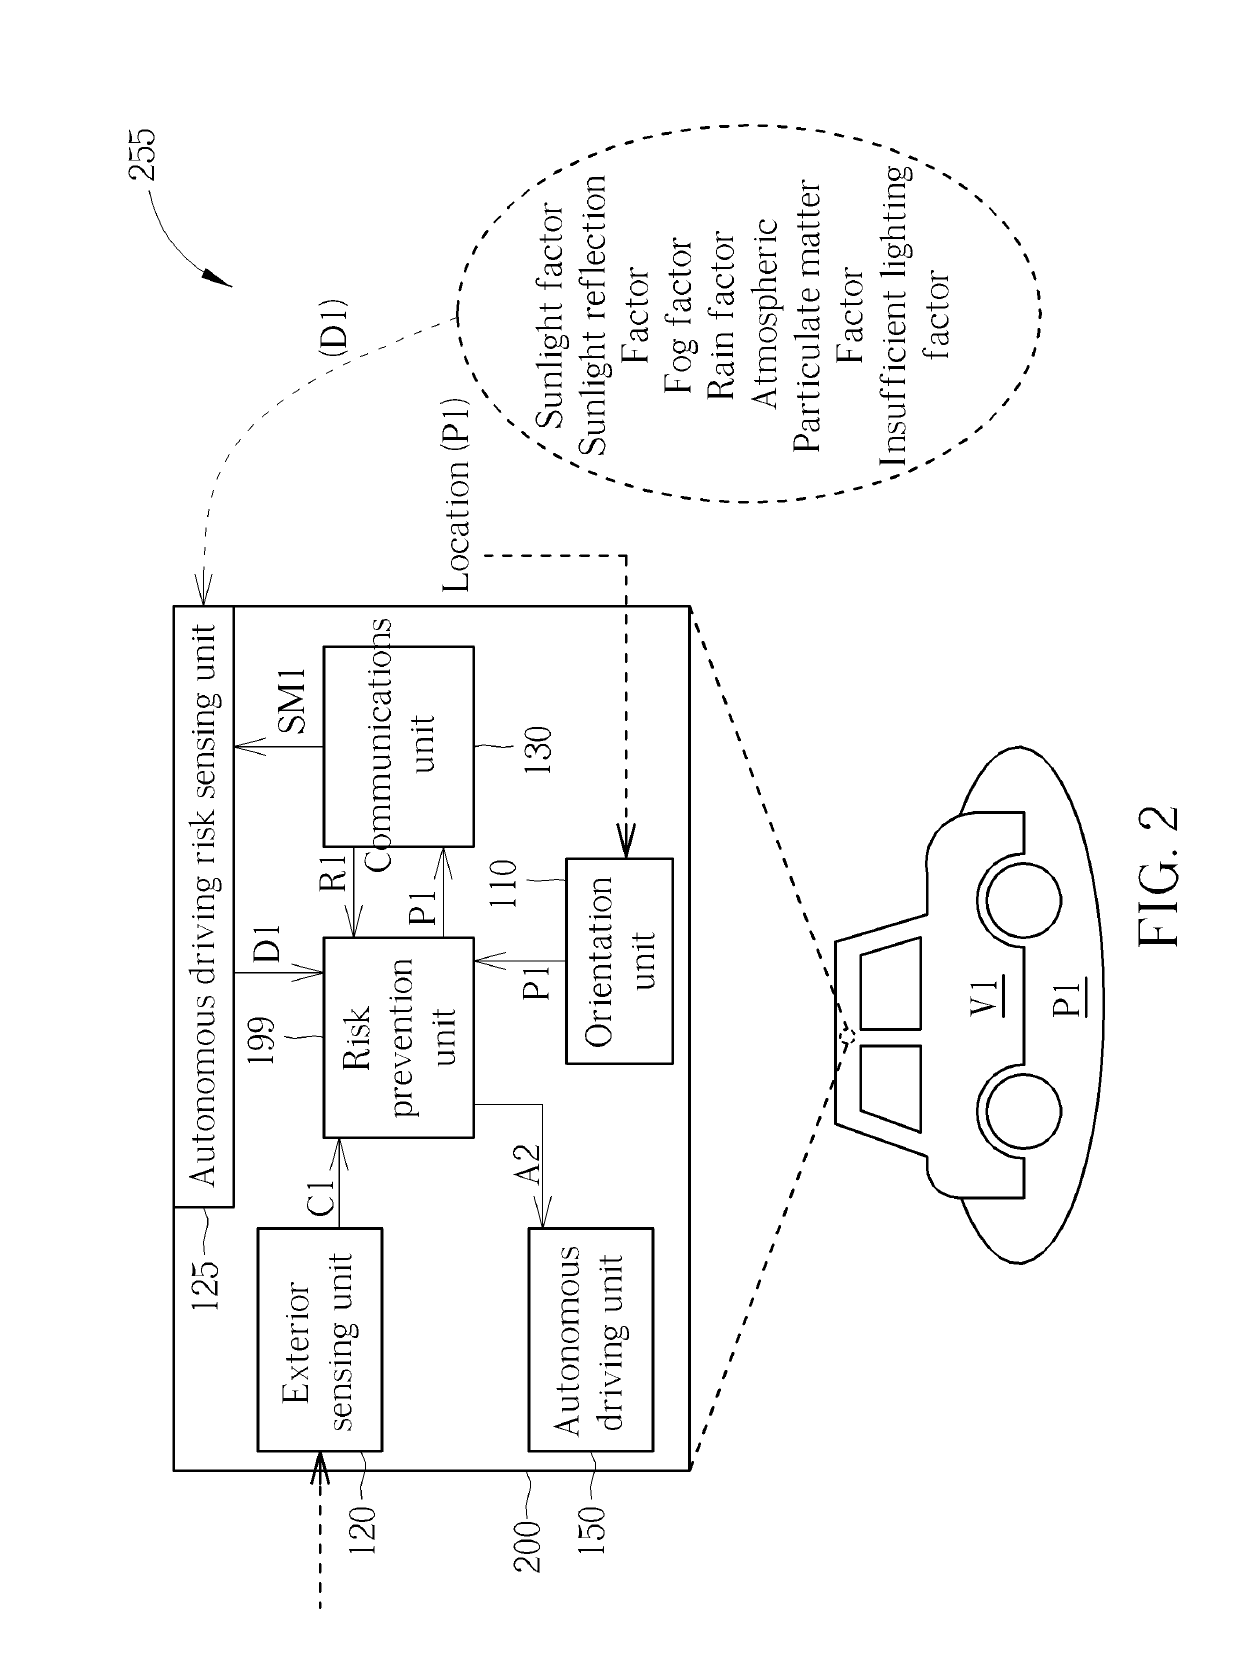 Vehicle driving risk classification and prevention system and method